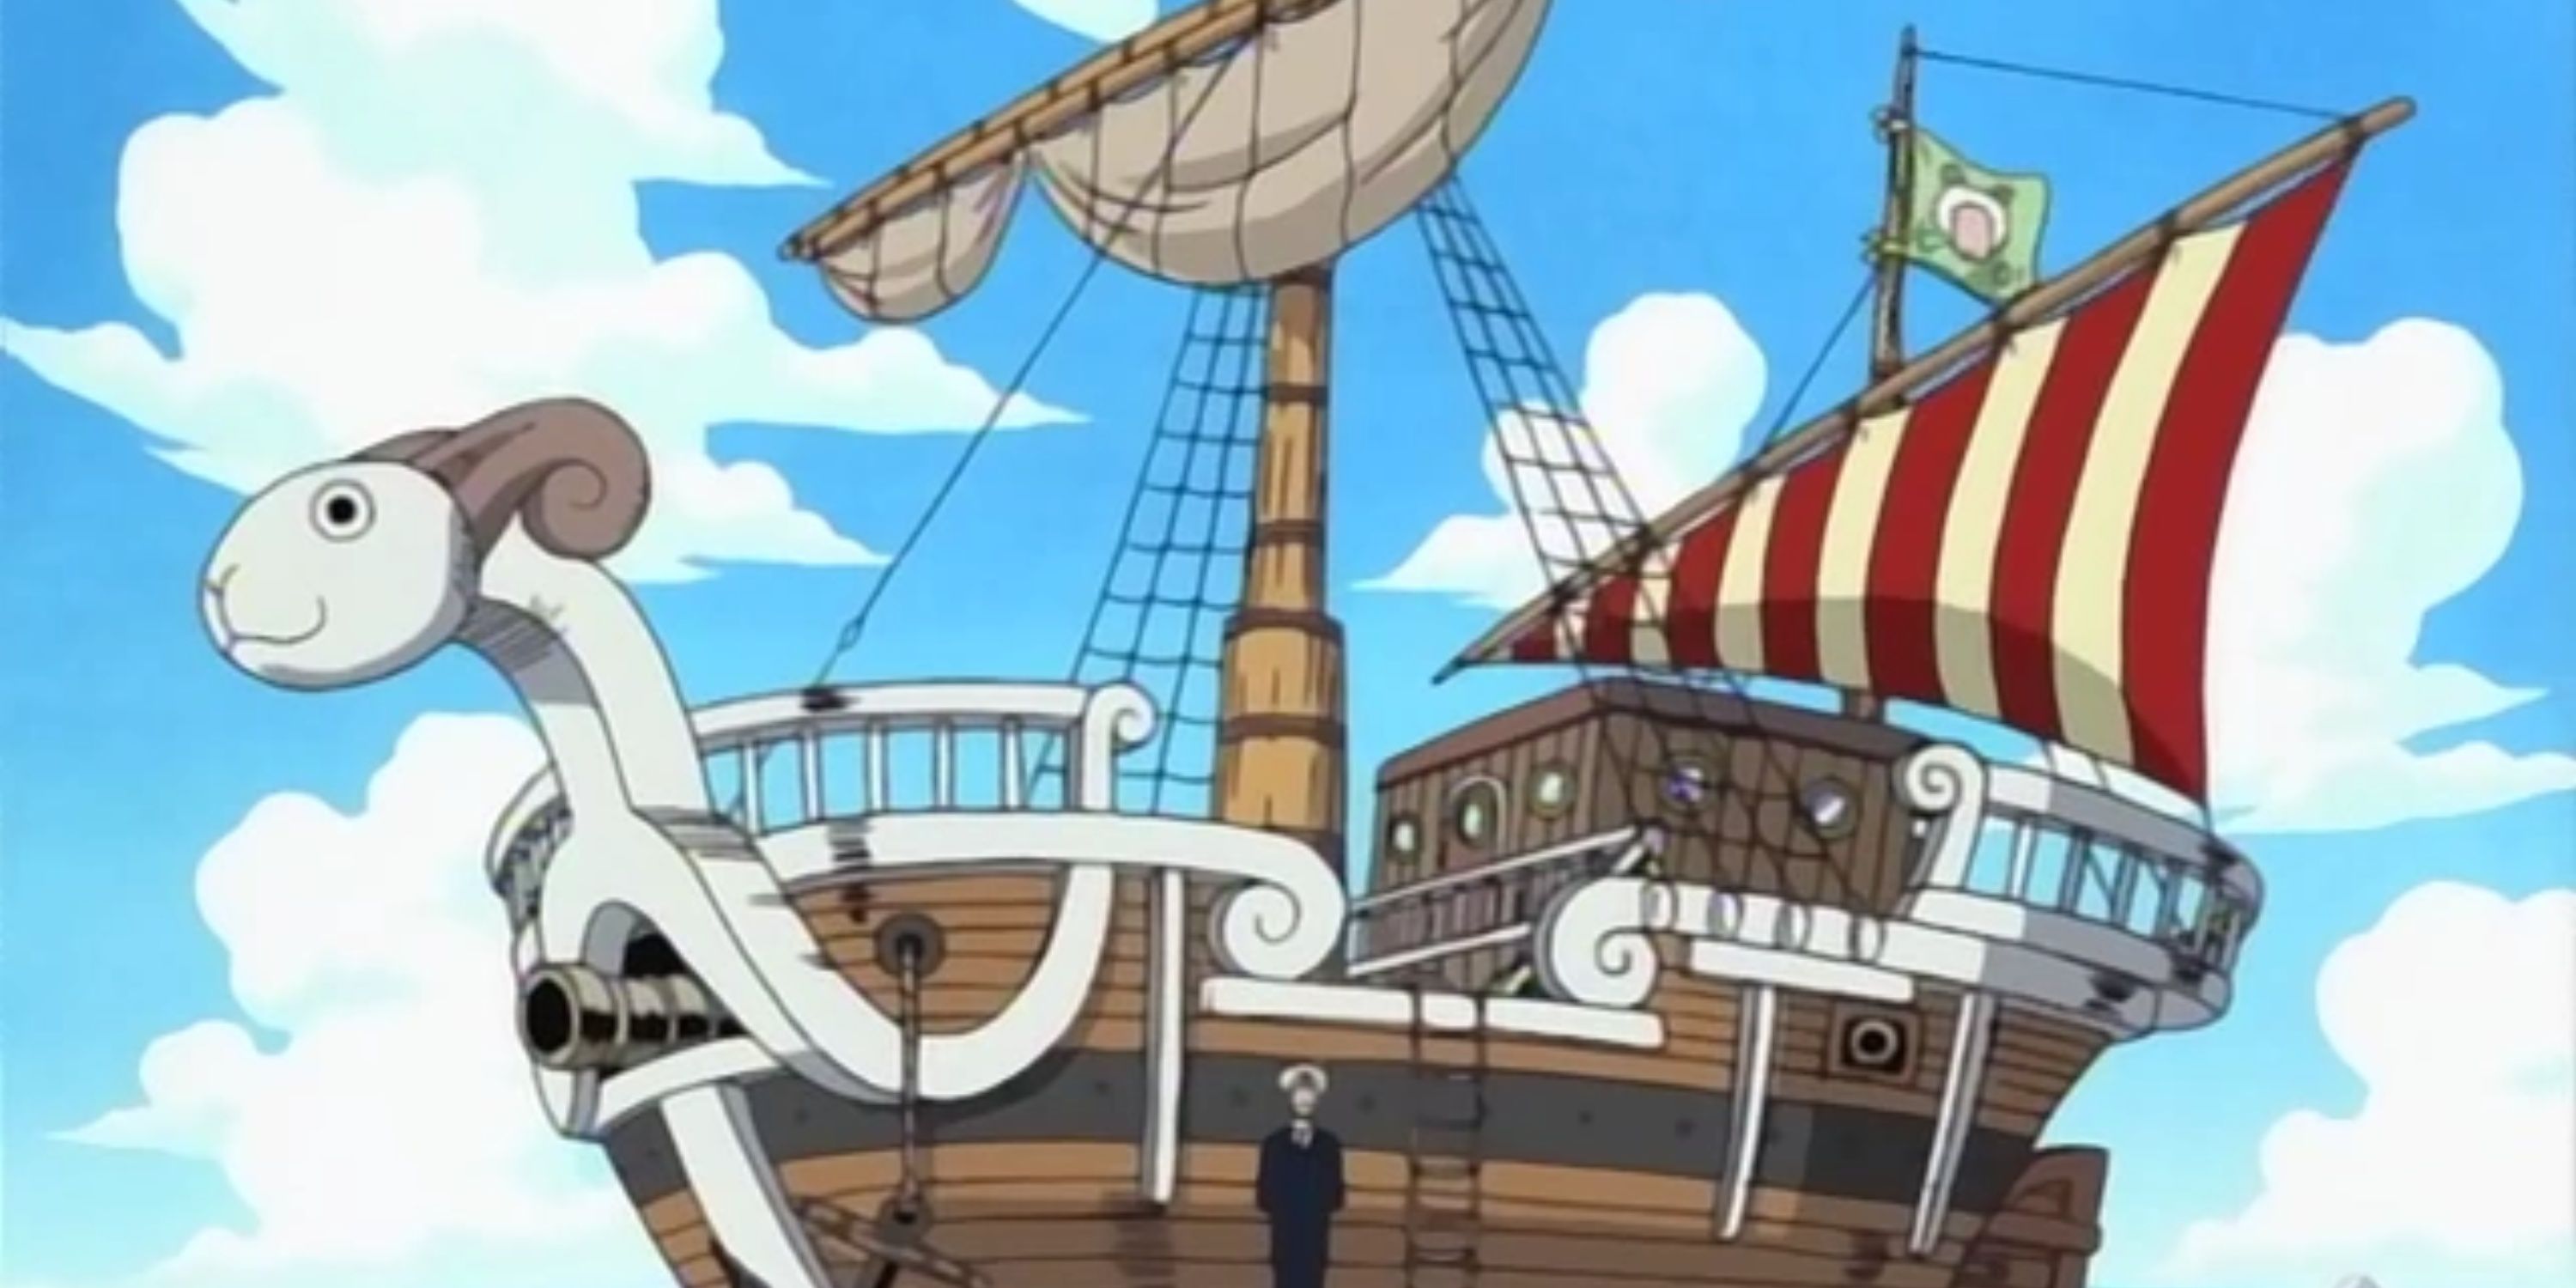 Merry standing in front of the Going Merry in One Piece's Syrup Village Arc